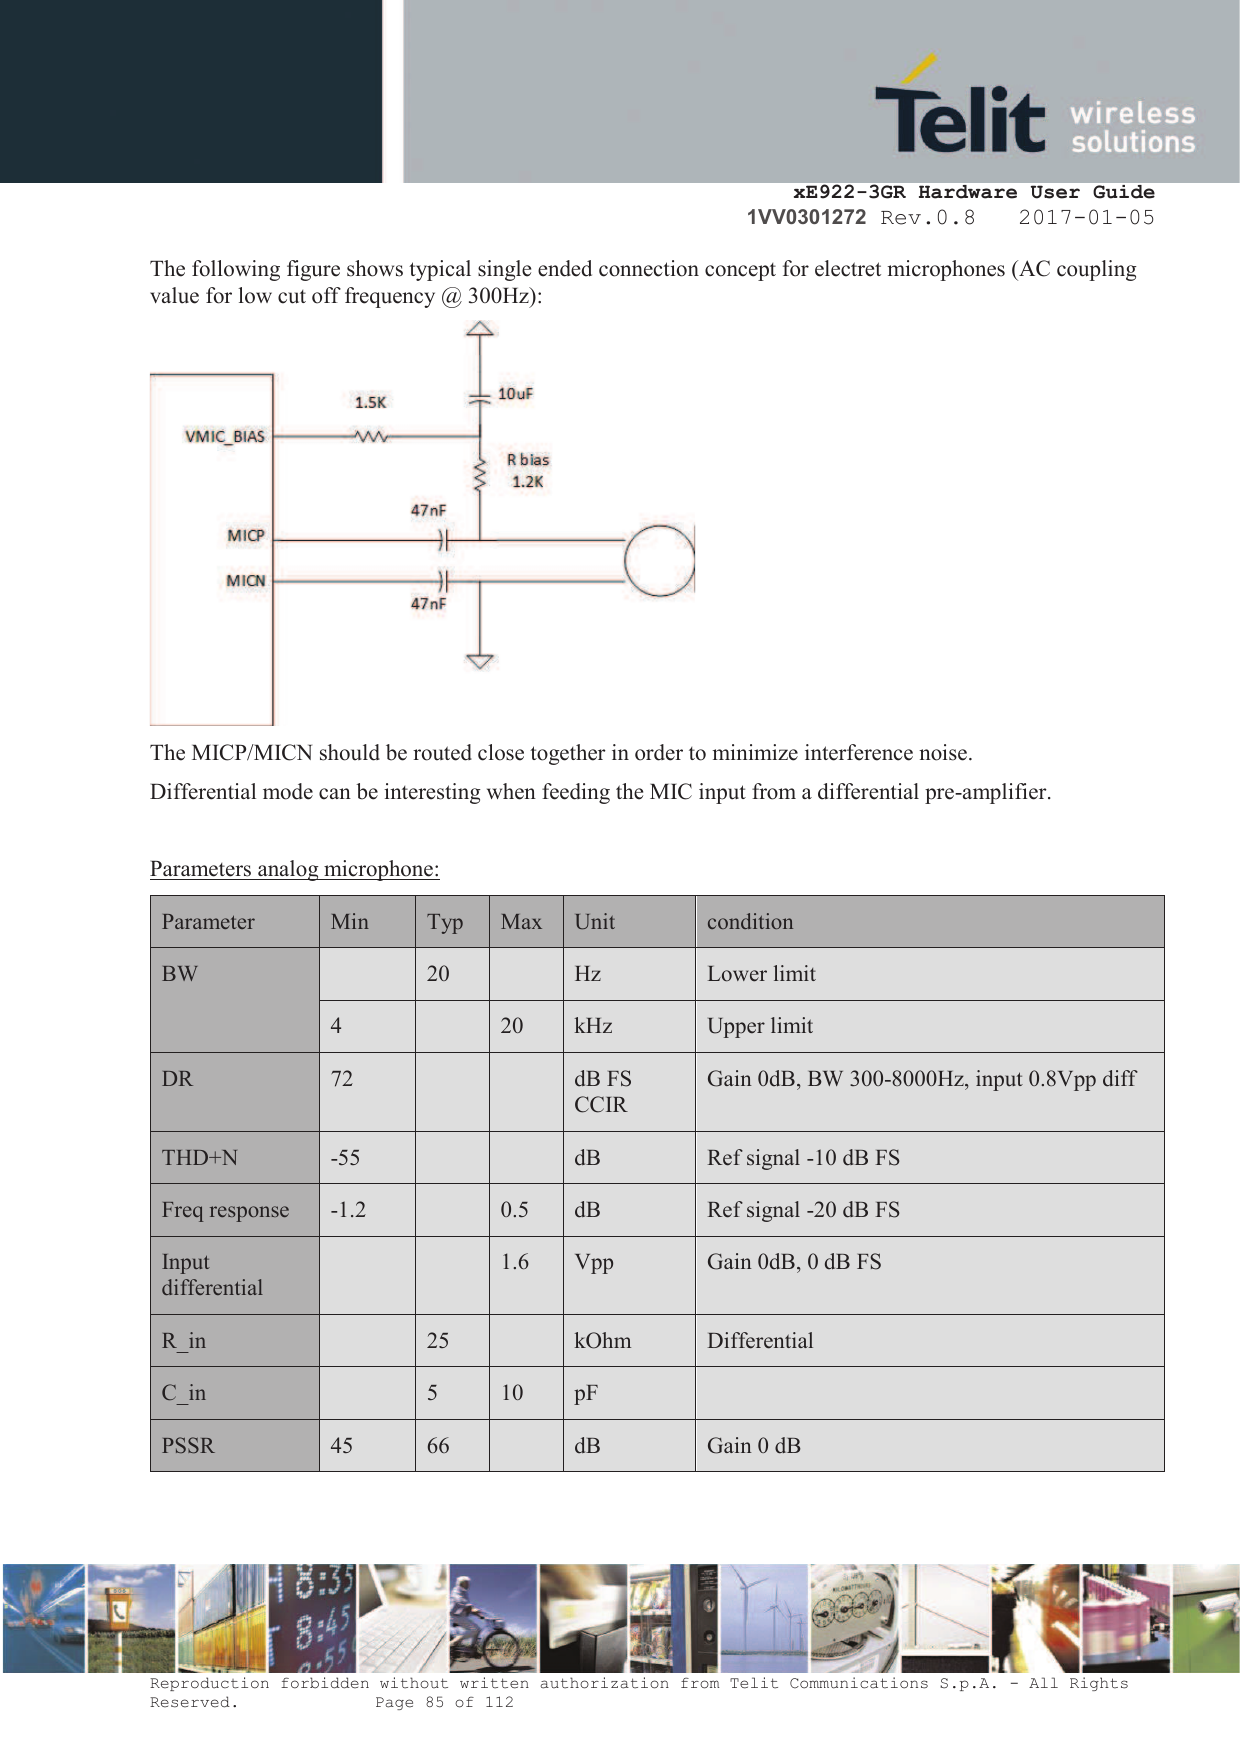     xE922-3GR Hardware User Guide 1VV0301272 Rev.0.8   2017-01-05 Reproduction forbidden without written authorization from Telit Communications S.p.A. - All Rights Reserved.    Page 85 of 112  The following figure shows typical single ended connection concept for electret microphones (AC coupling value for low cut off frequency @ 300Hz):  The MICP/MICN should be routed close together in order to minimize interference noise. Differential mode can be interesting when feeding the MIC input from a differential pre-amplifier.  Parameters analog microphone: Parameter  Min Typ Max Unit condition BW  20  Hz Lower limit 4  20 kHz Upper limit DR 72   dB FS CCIR Gain 0dB, BW 300-8000Hz, input 0.8Vpp diff THD+N -55   dB Ref signal -10 dB FS Freq response -1.2  0.5 dB Ref signal -20 dB FS Input differential   1.6 Vpp Gain 0dB, 0 dB FS R_in  25  kOhm Differential C_in  5 10 pF  PSSR 45 66  dB Gain 0 dB   